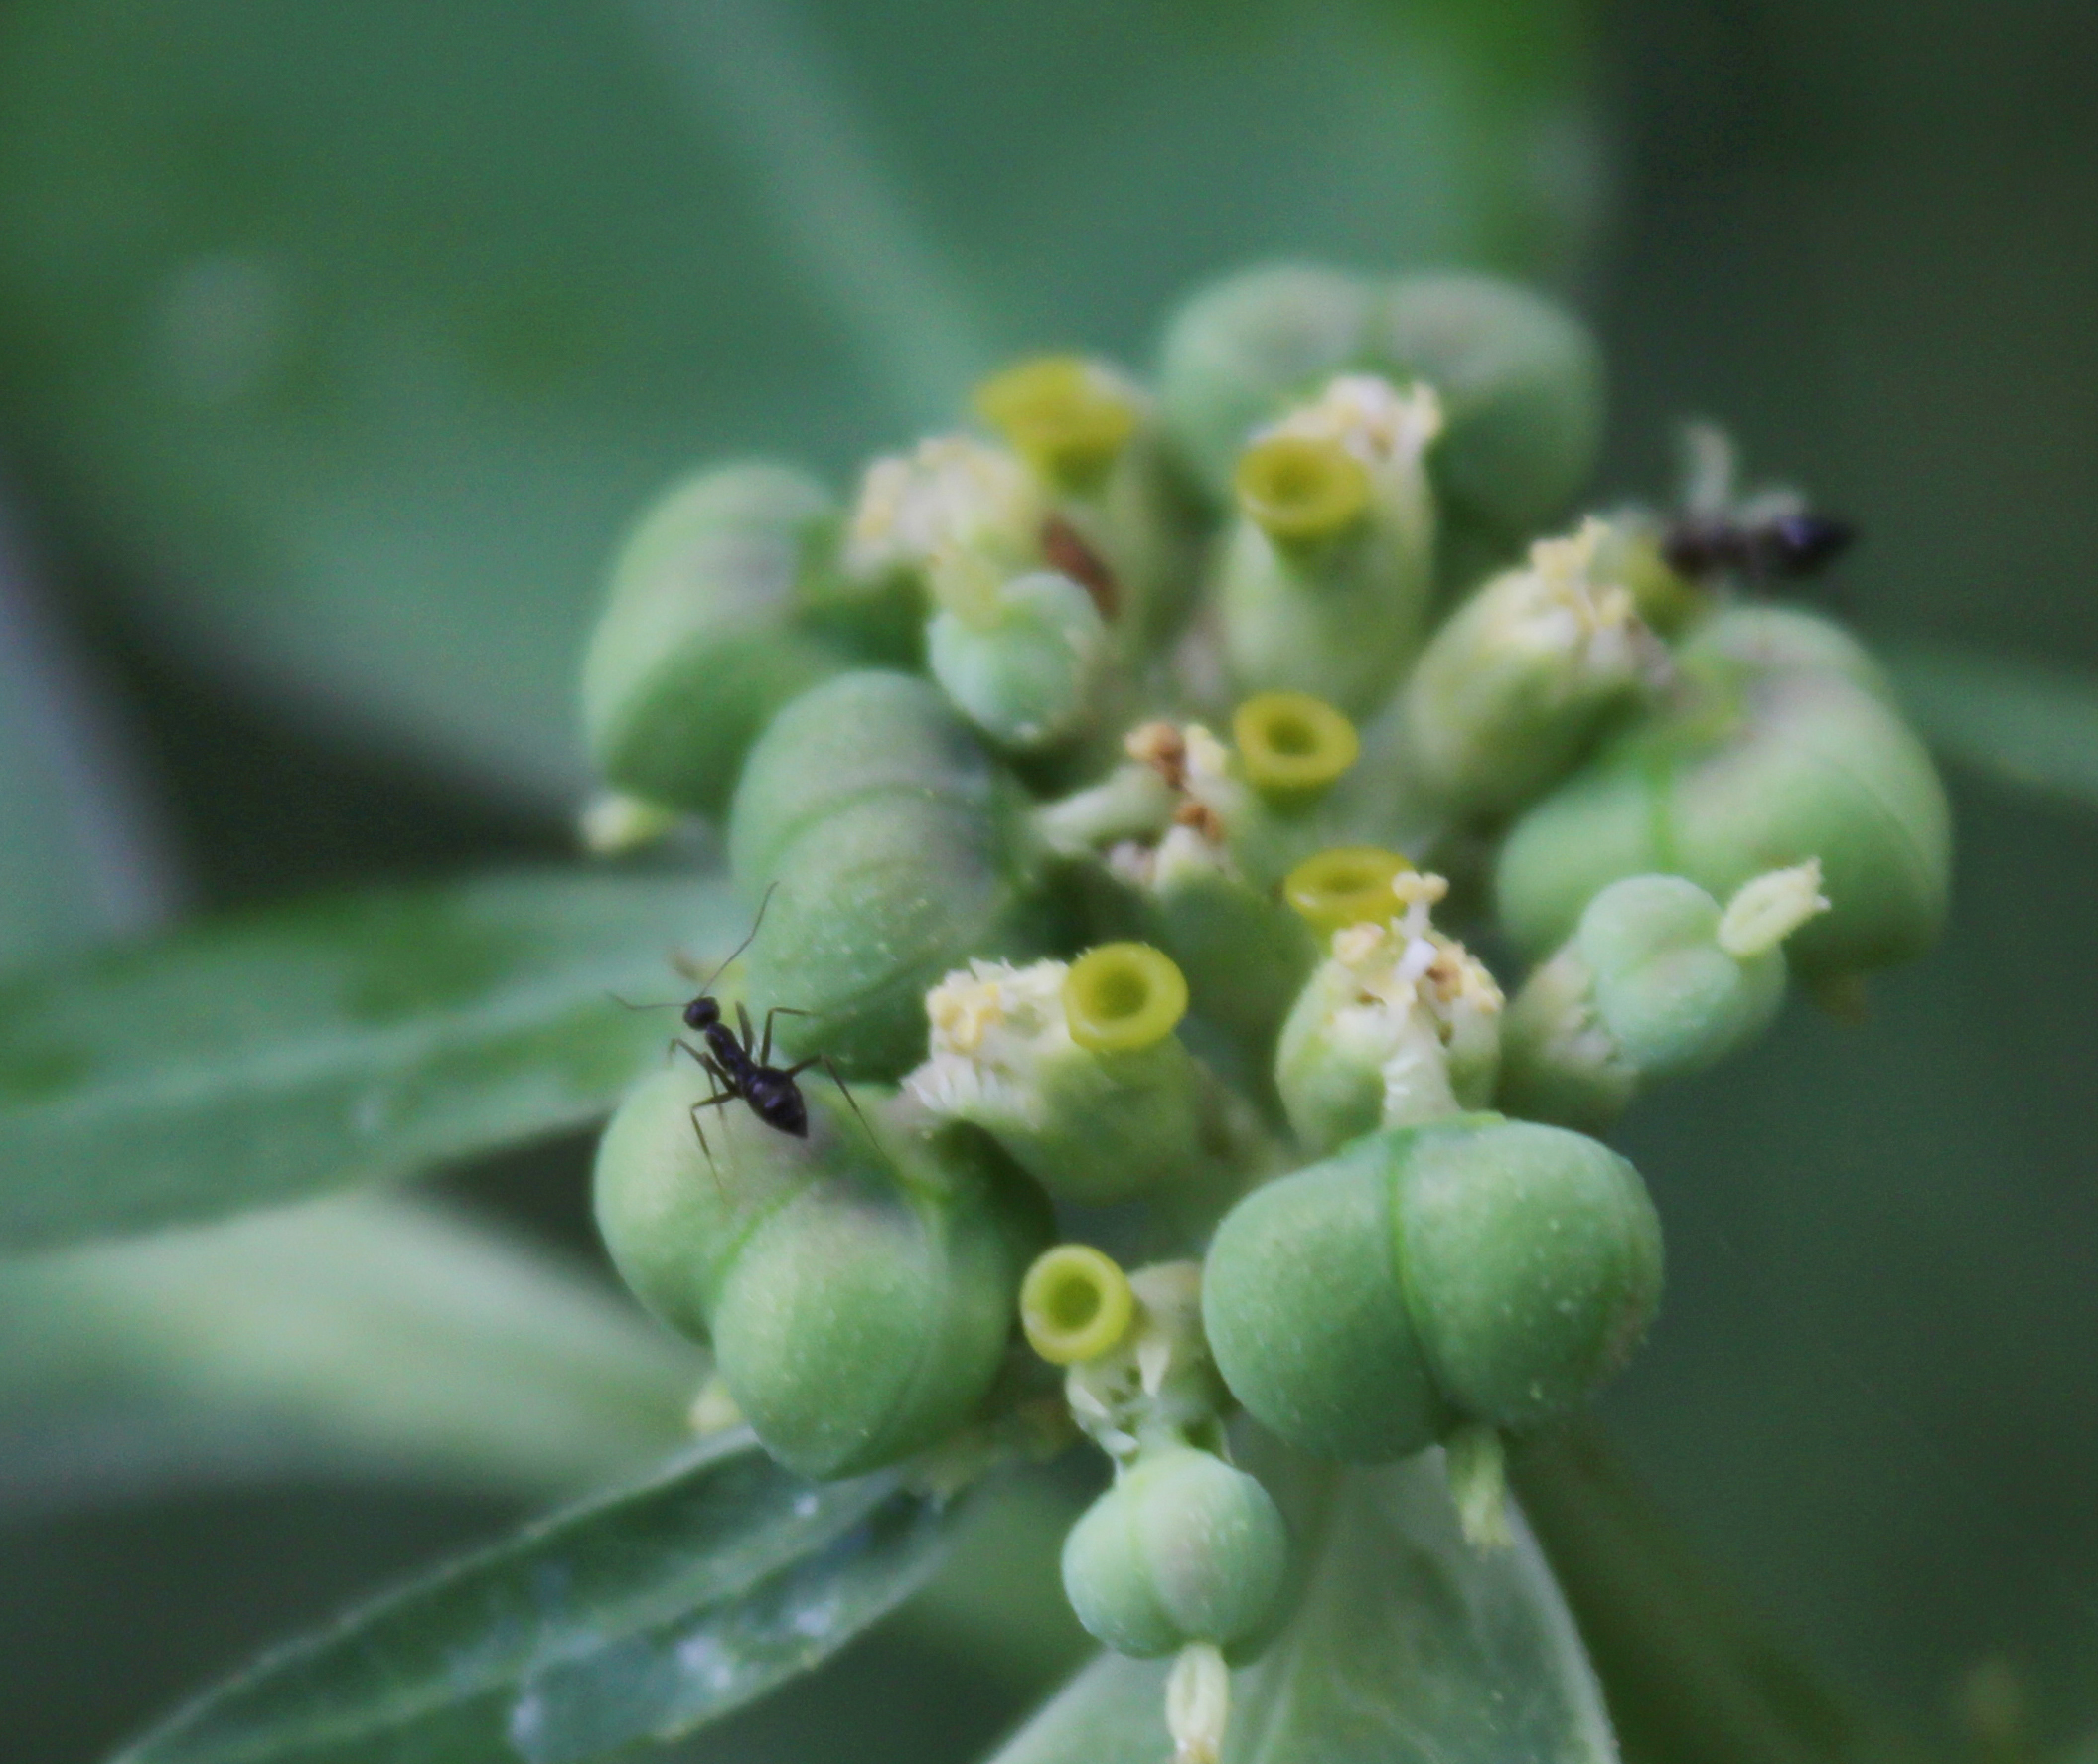 Insects on flower buds